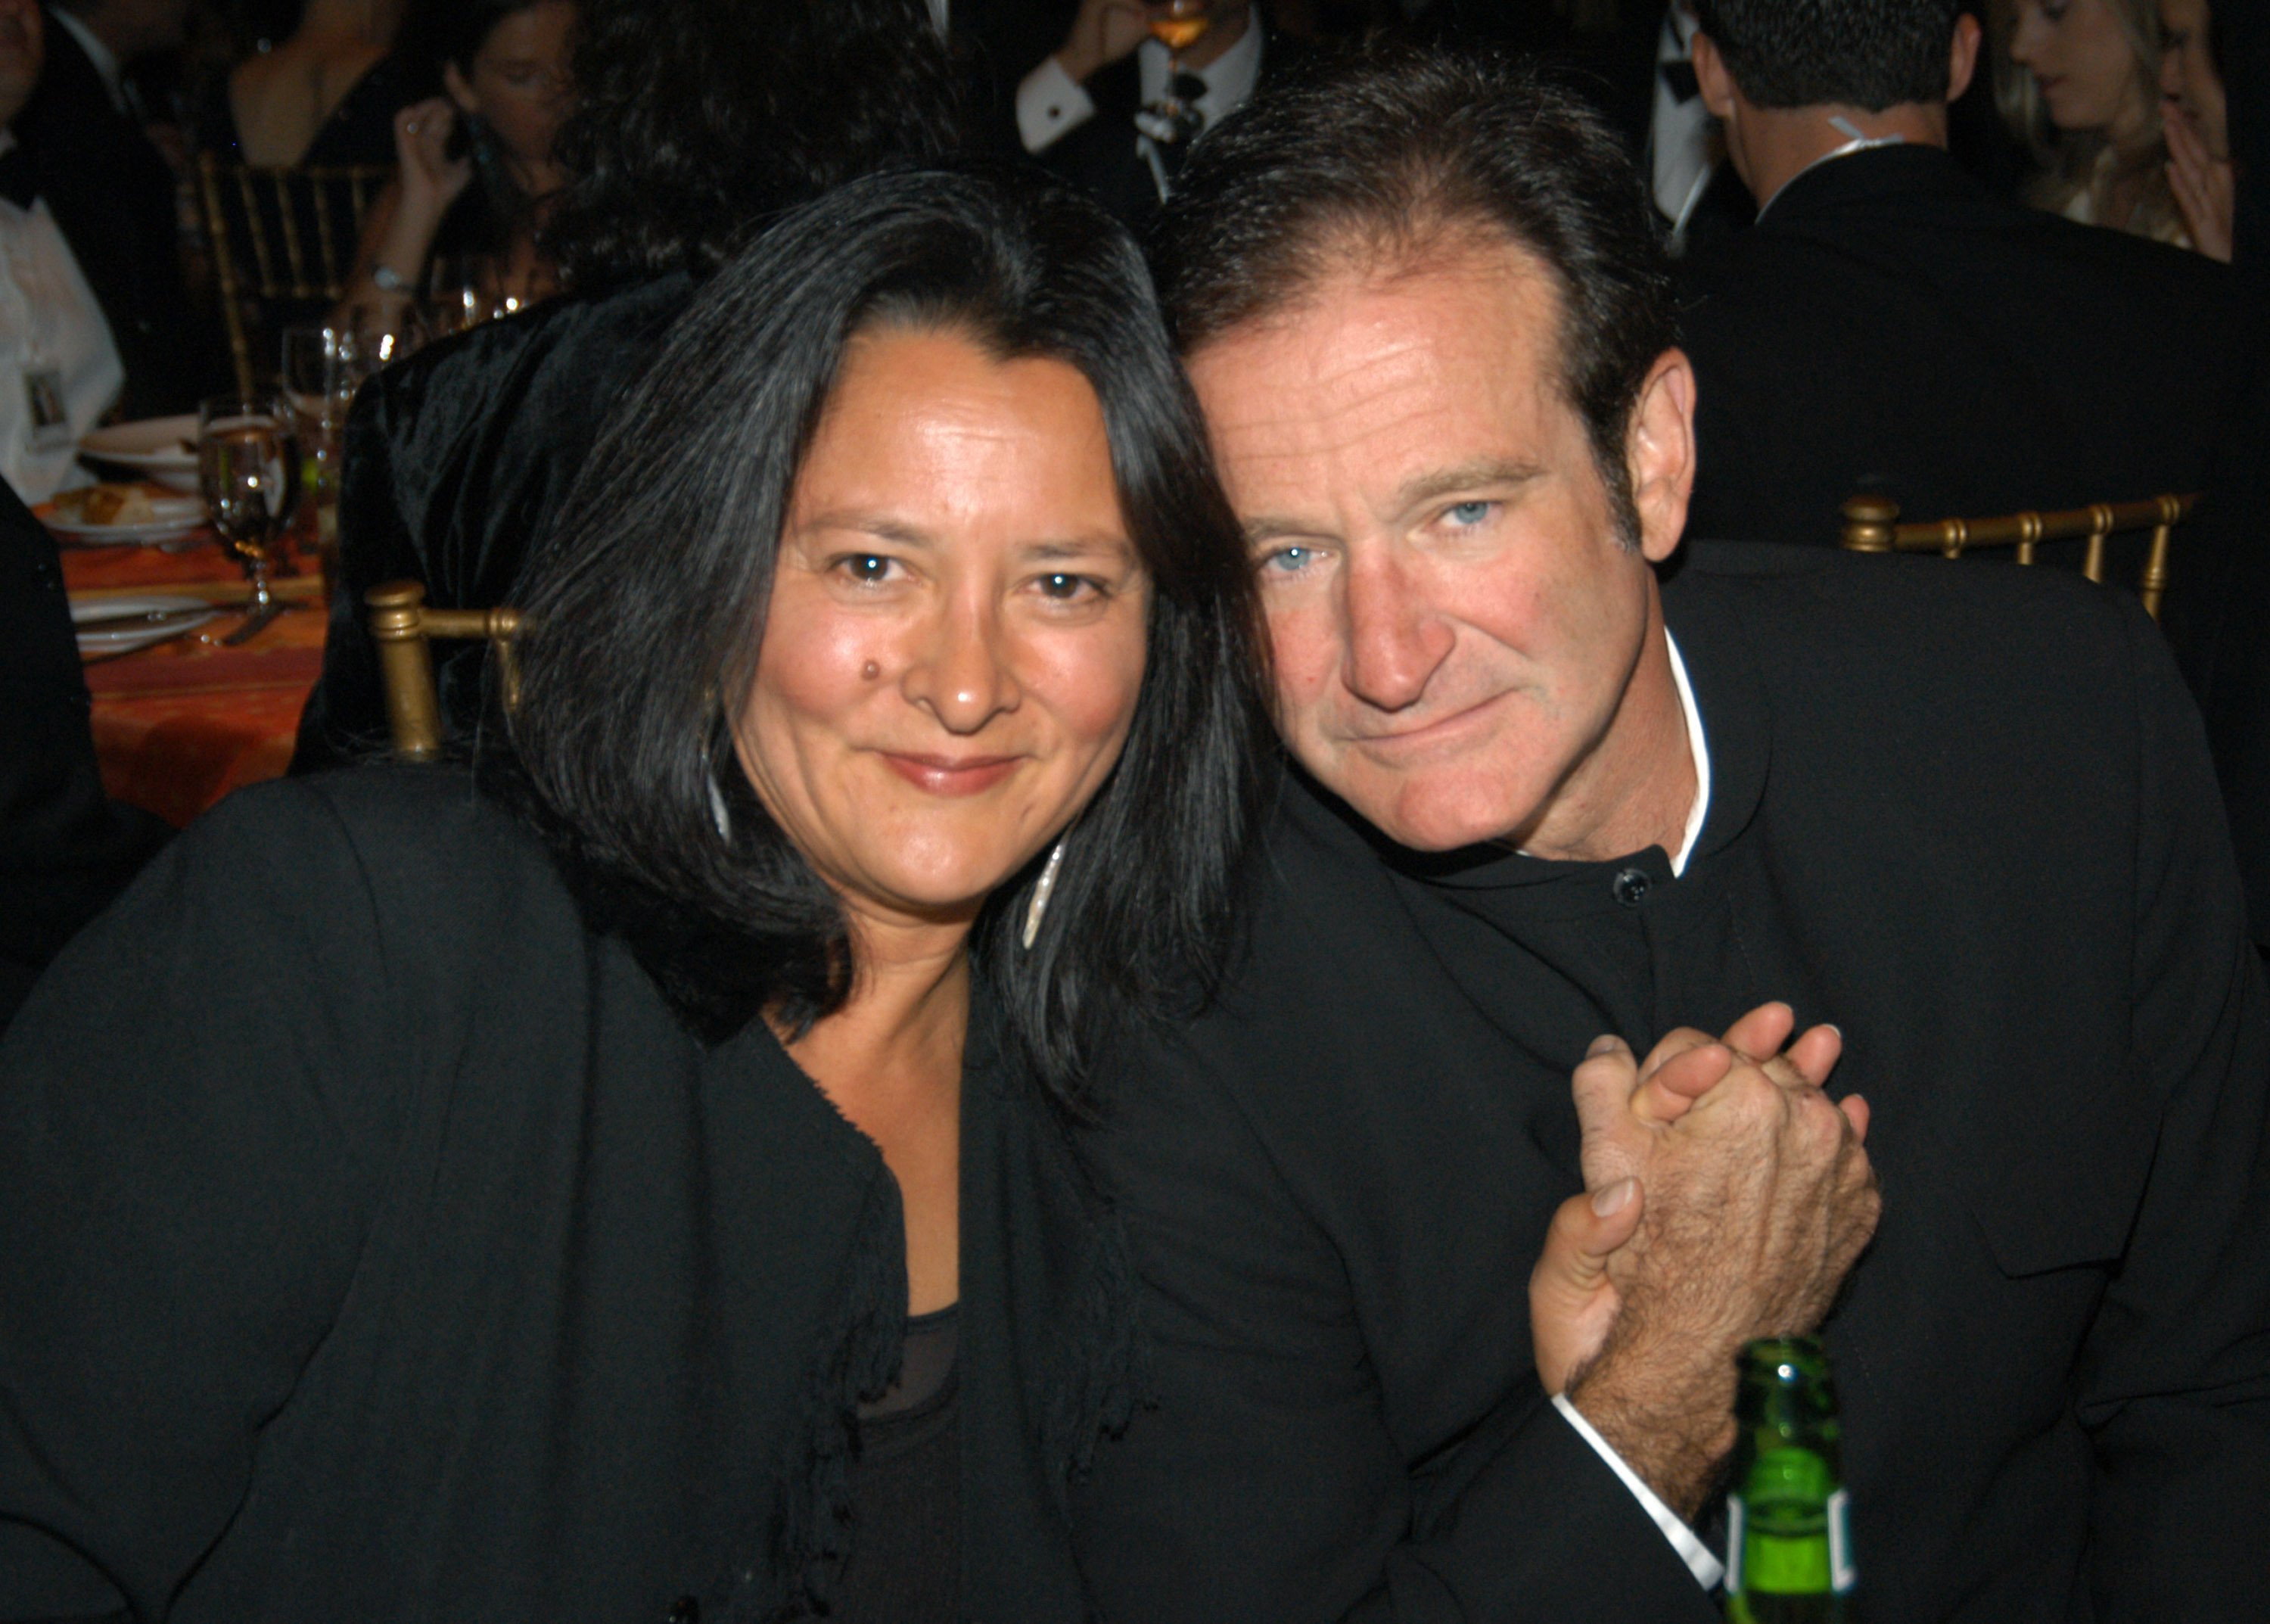 Robin Williams and Marsha Garces Williams at The Andre Agassi Charitable Foundation's 8th "Grand Slam for Children" Fundraiser - Dinner and Auction. | Source: Getty Images